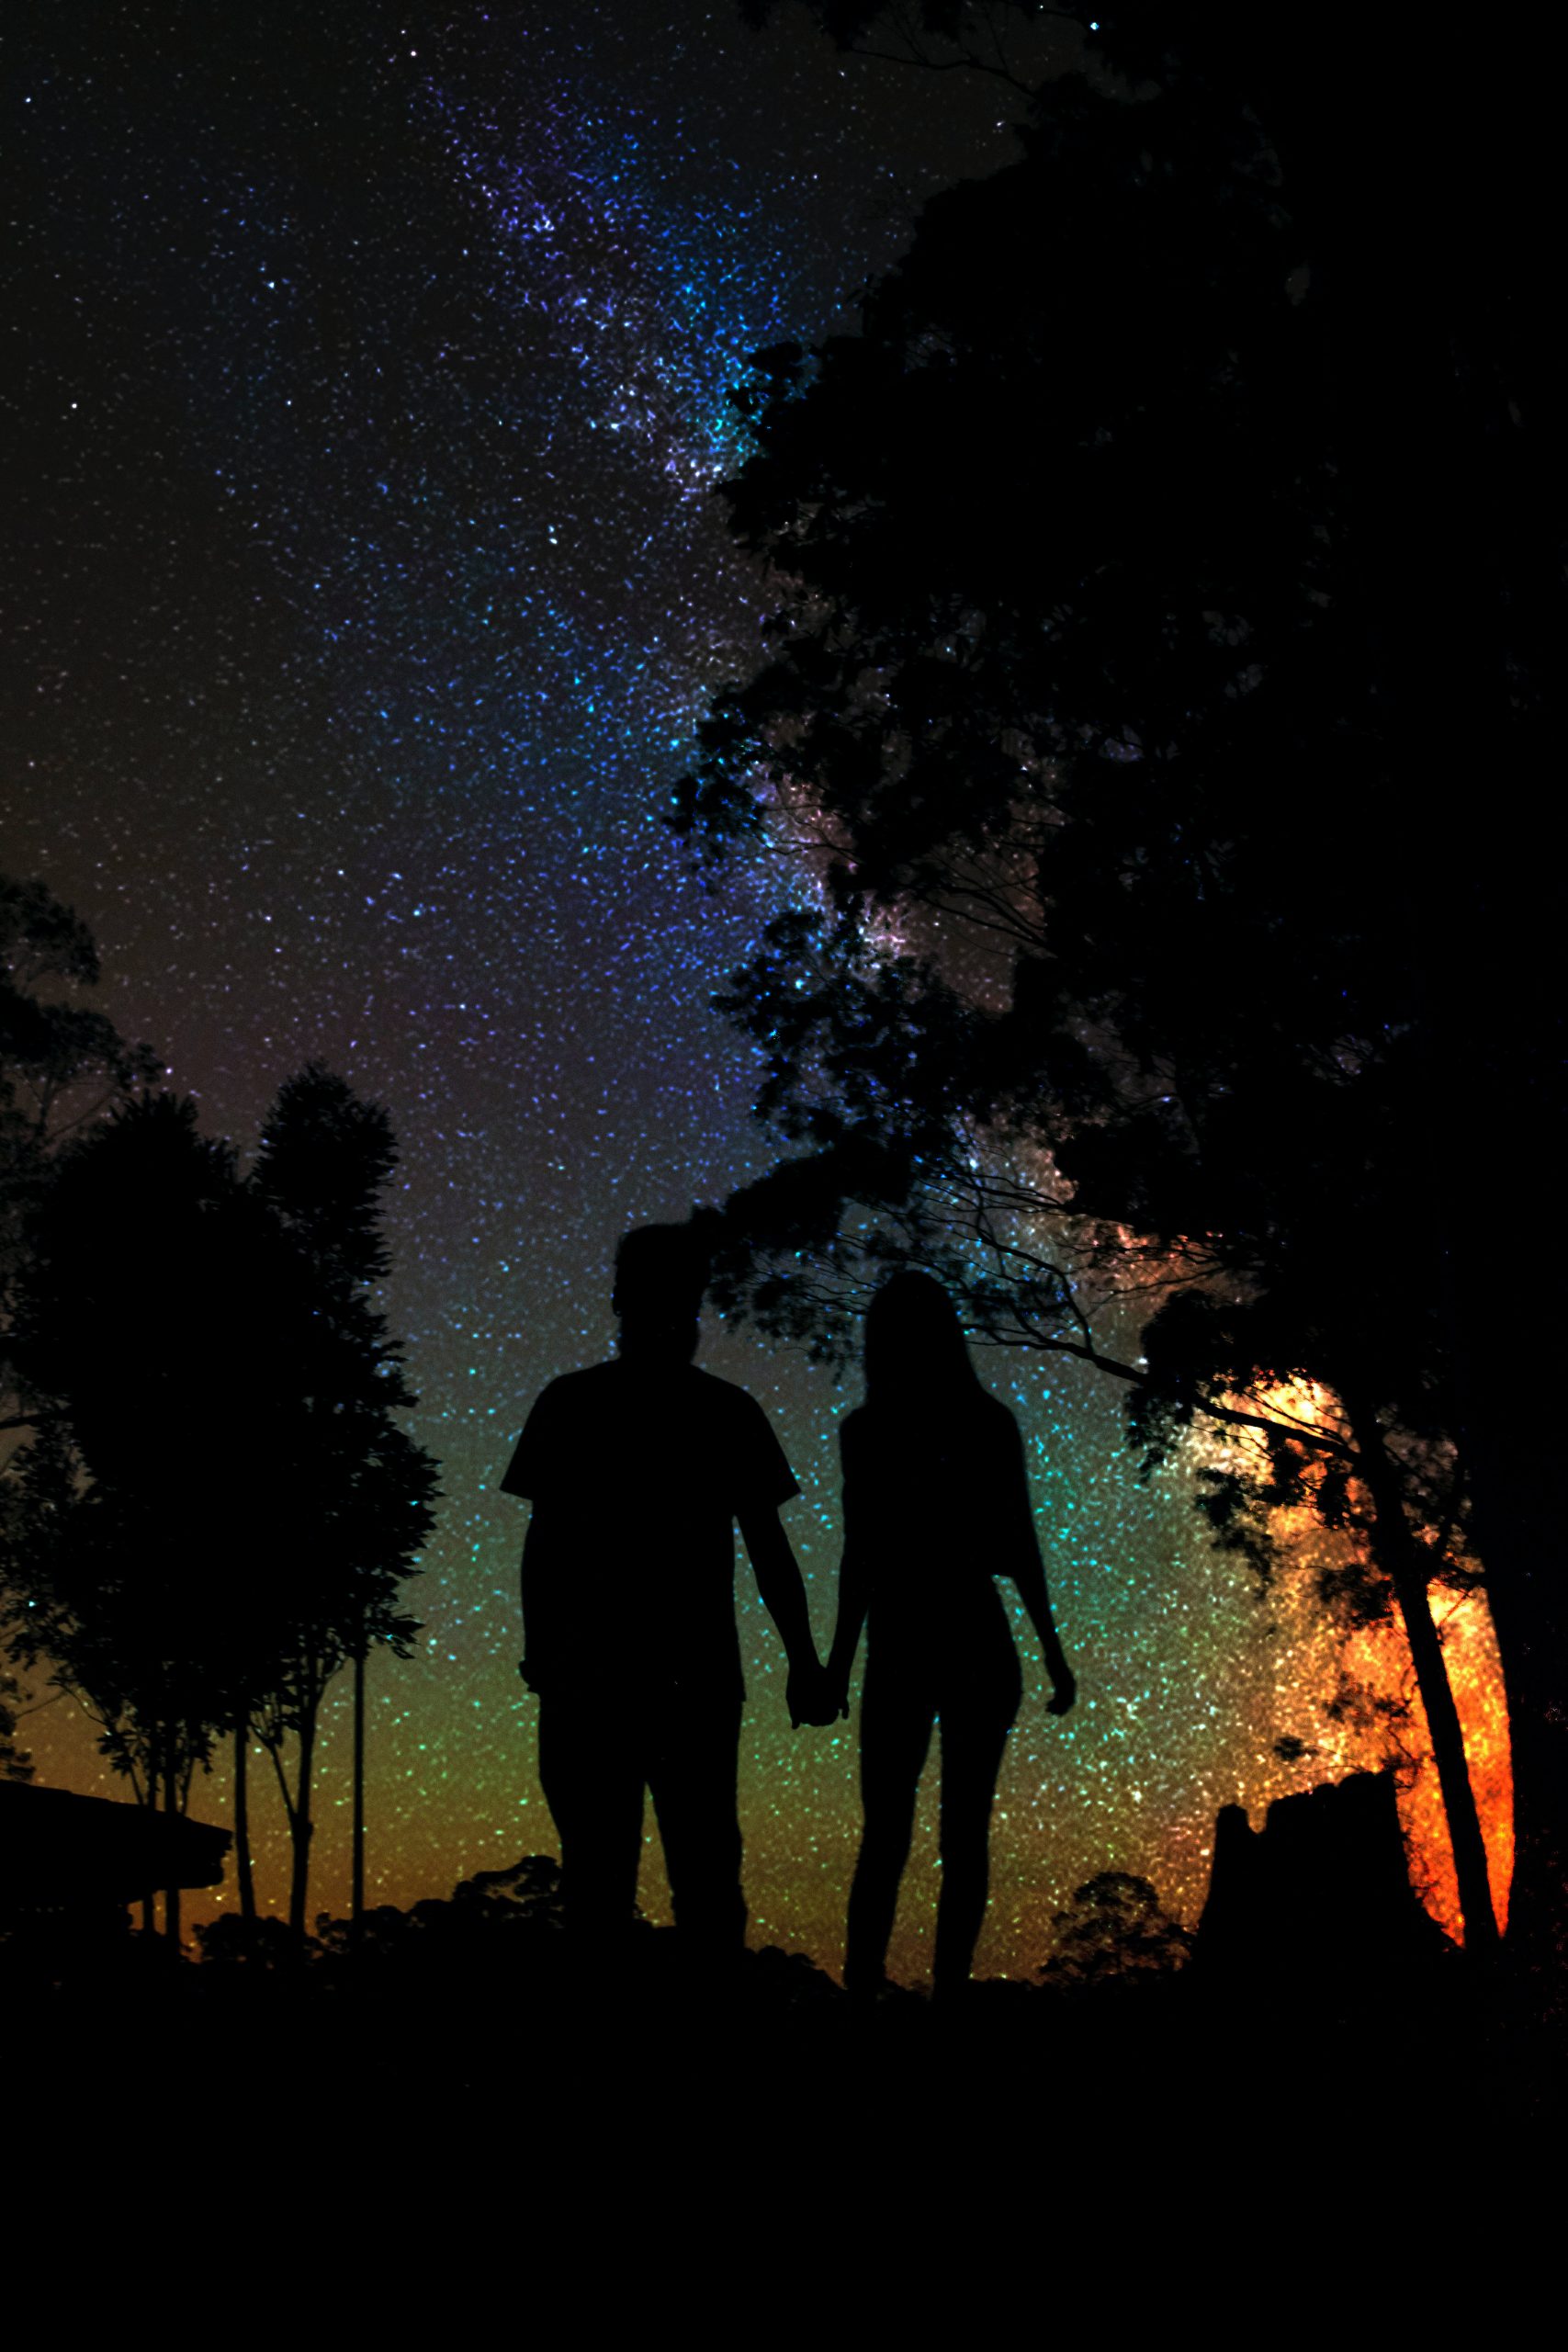 holding hands at night looking at the milky way